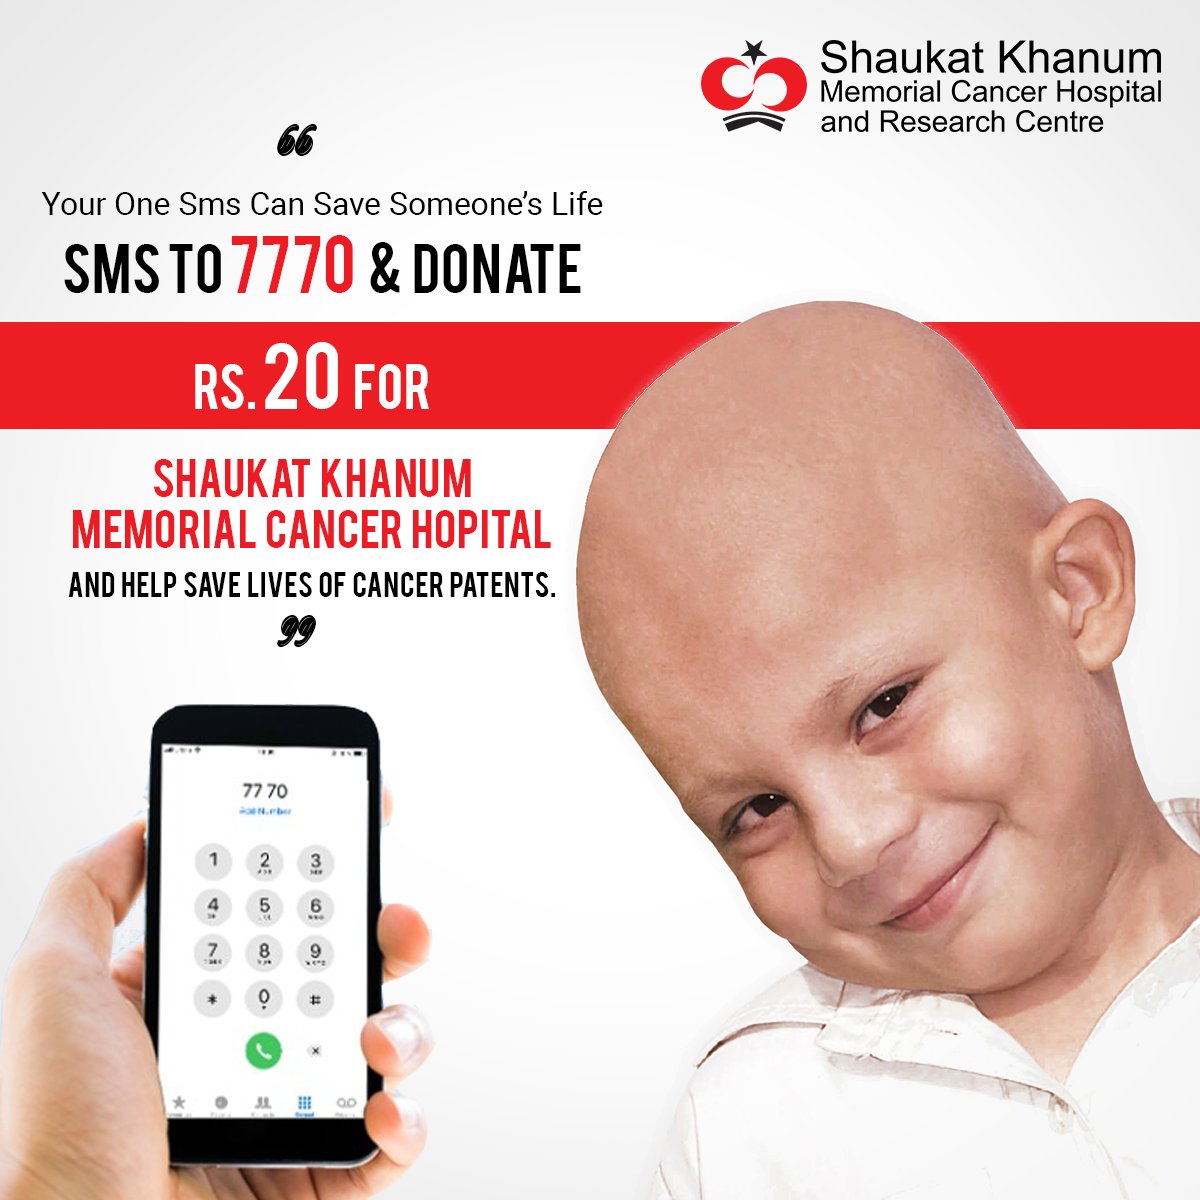 Your one SMS can save someone’s life.
Send an SMS to the number 7770 to donate Rs. 20 (+tax) to support the treatment of underprivileged cancer patients at Shaukat Khanum Memorial Cancer Hospital and Research Centre through any network in Pakistan.

#SMSTo7770 #SKMCH